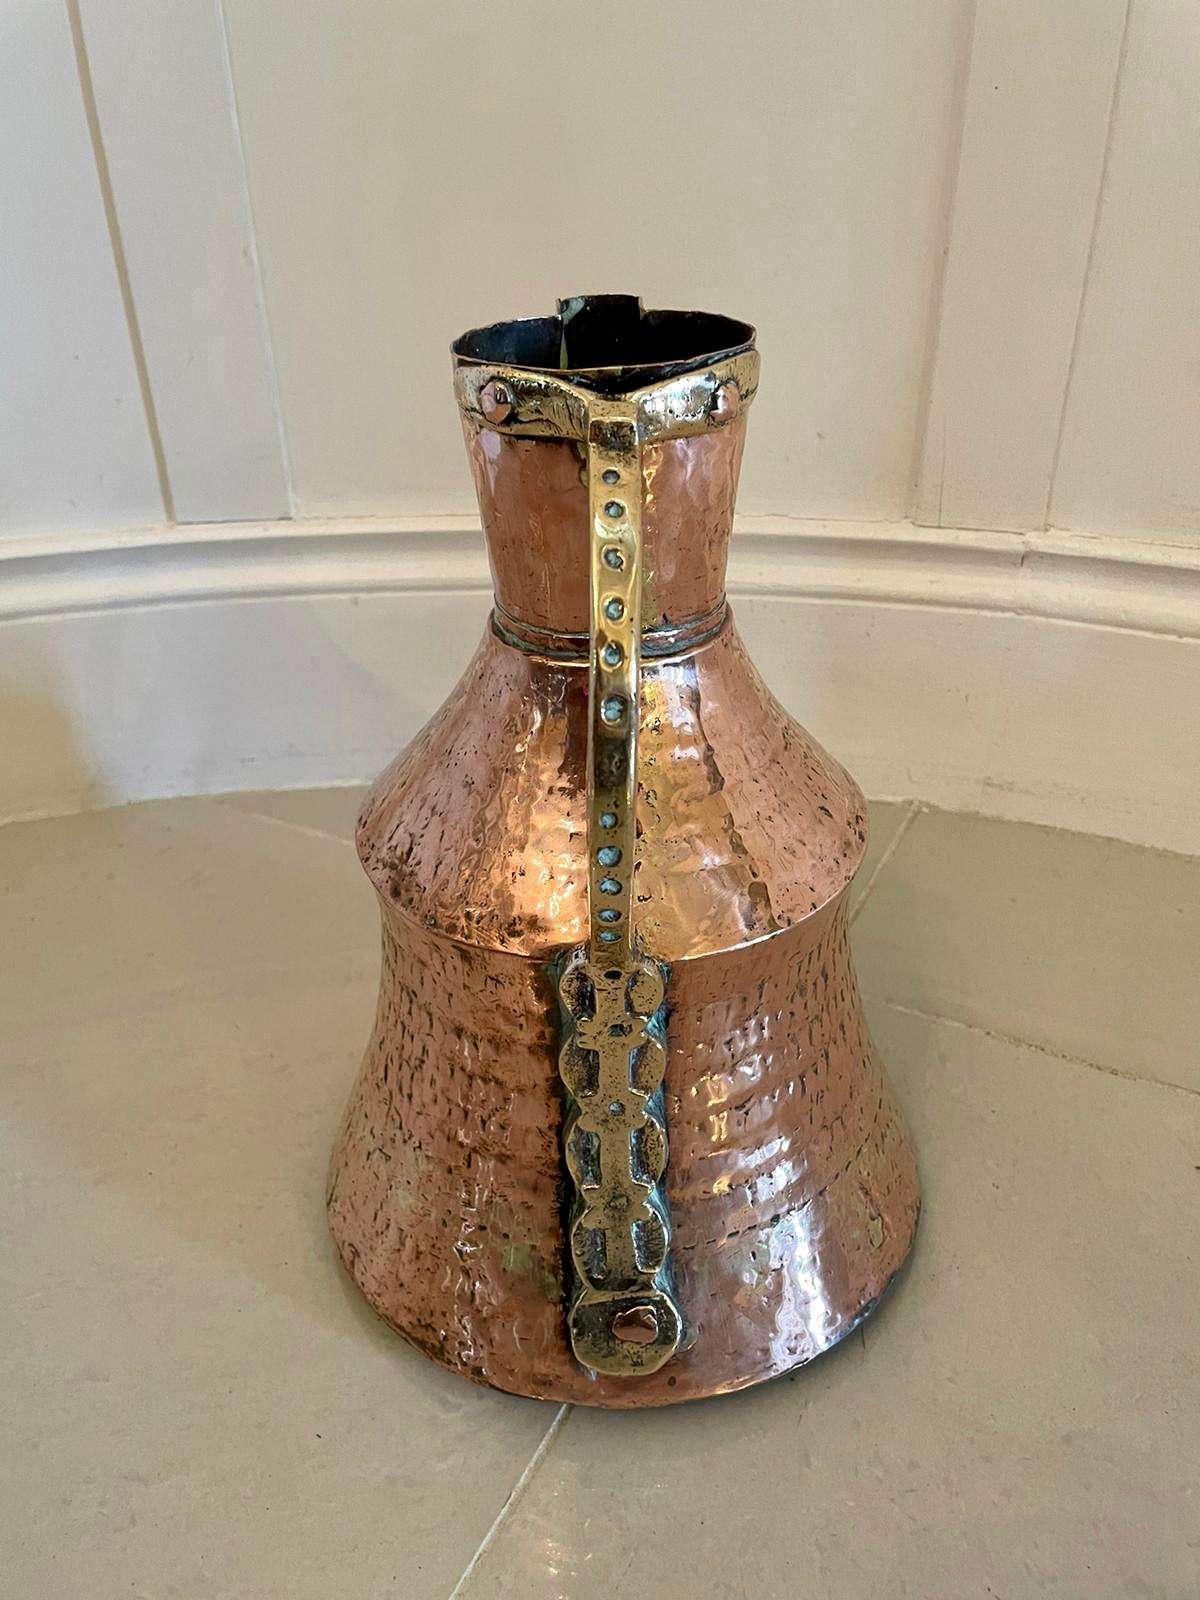 Large antique Arts & Crafts copper and brass milk jug

An unusual large antique Arts & Crafts copper and brass milk jug having an attractive unusual shaped handle and beautifully designed and handcrafted body with a band of brass expertly moulded